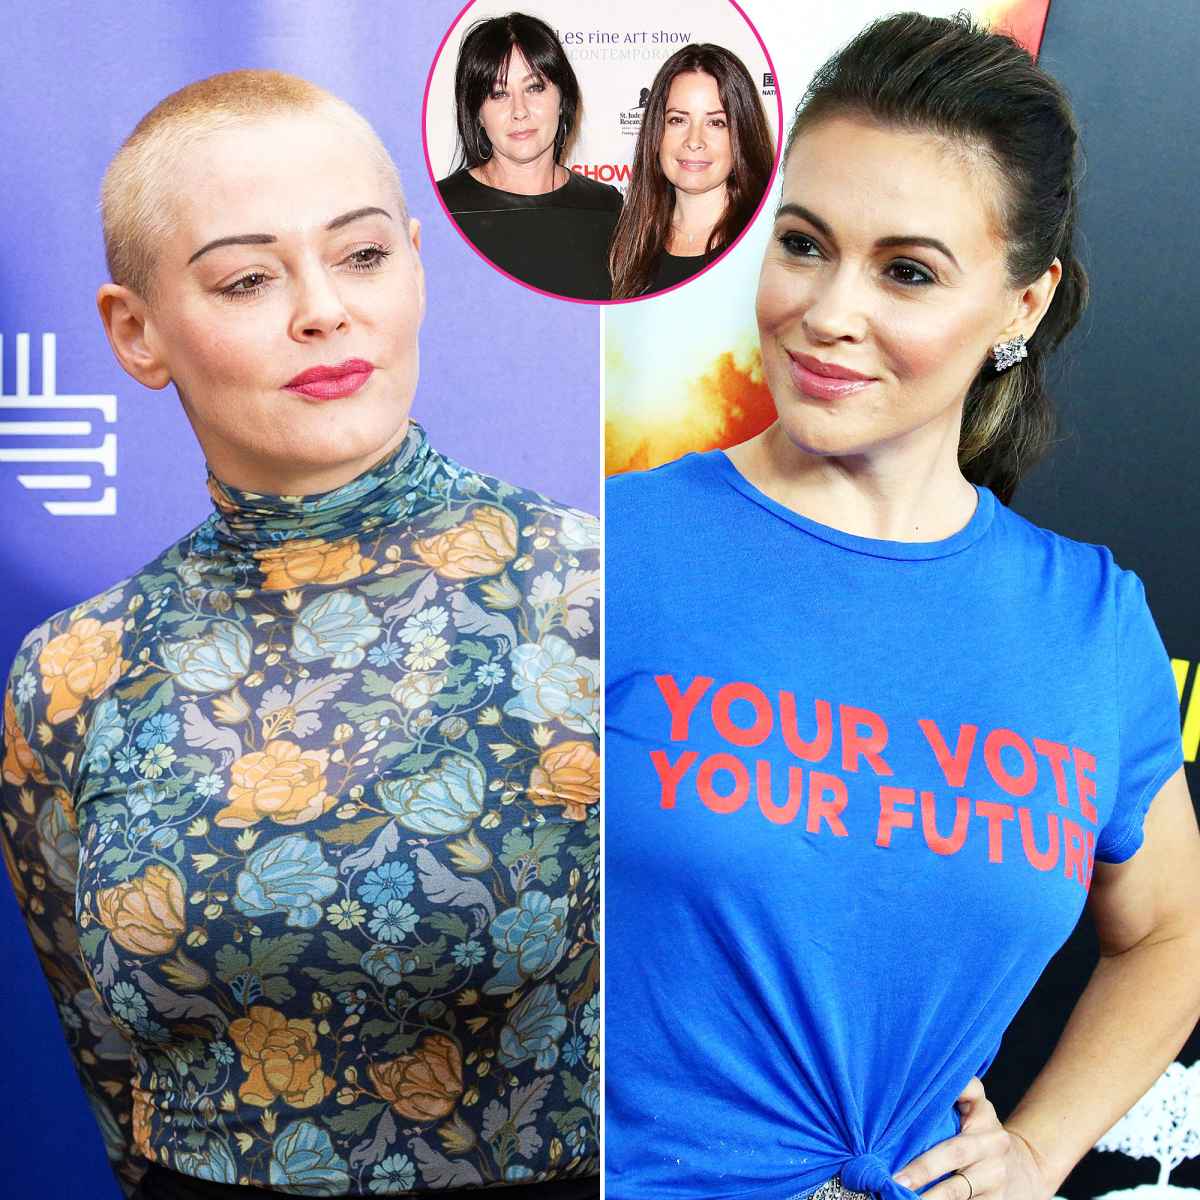 Alyssa Milano Getting Fucked Fake - Charmed' Behind-the-Scenes Drama Over the Years: A Timeline